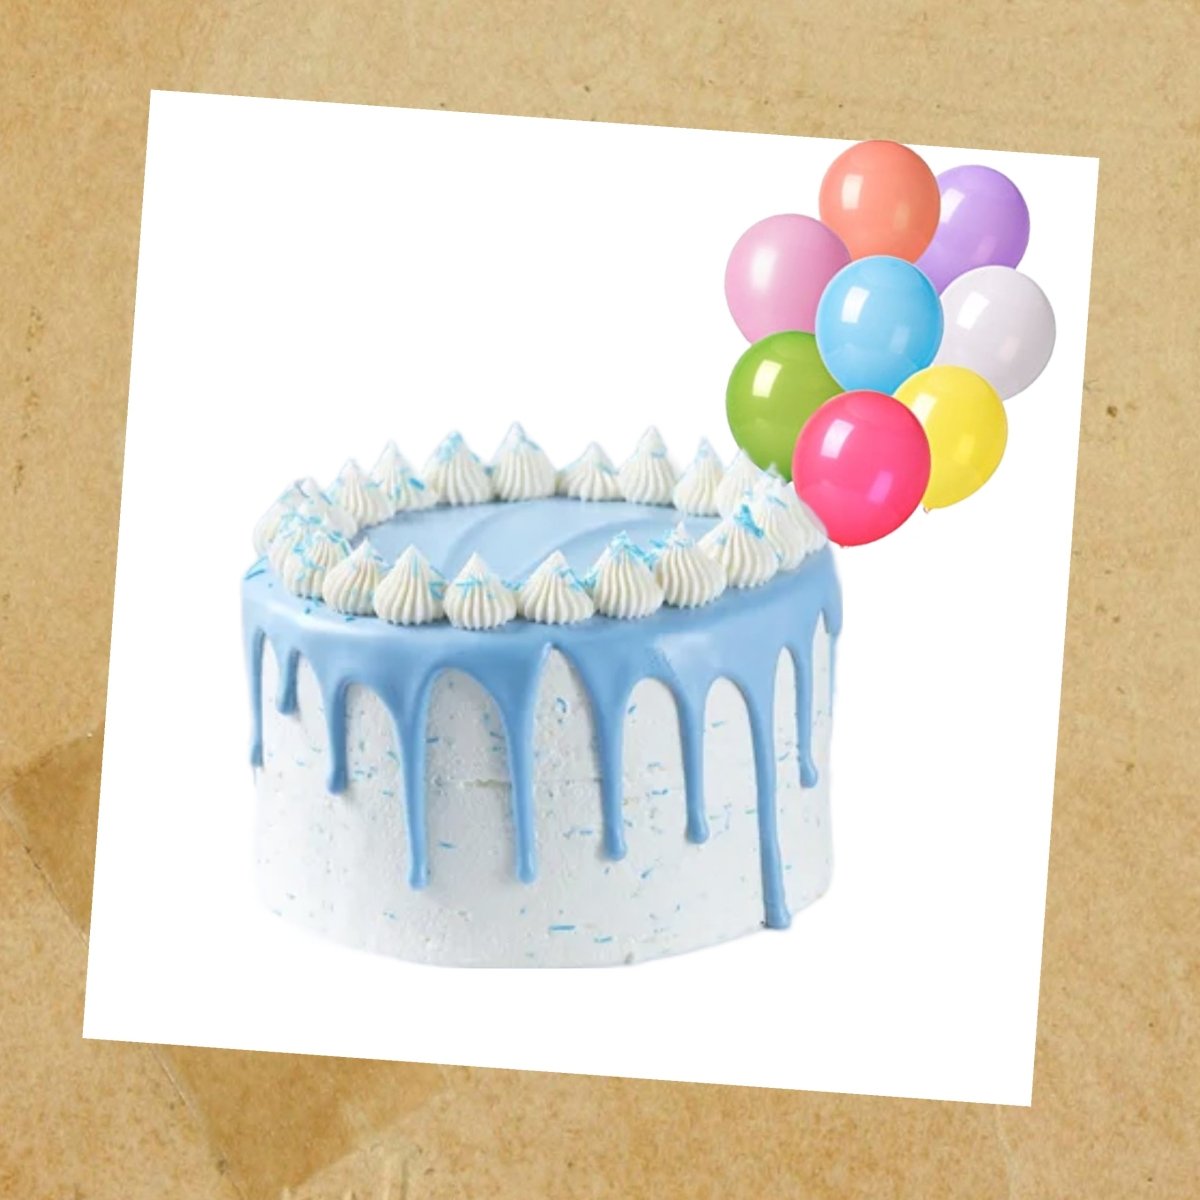 Delicious Cake with 9 Balloons